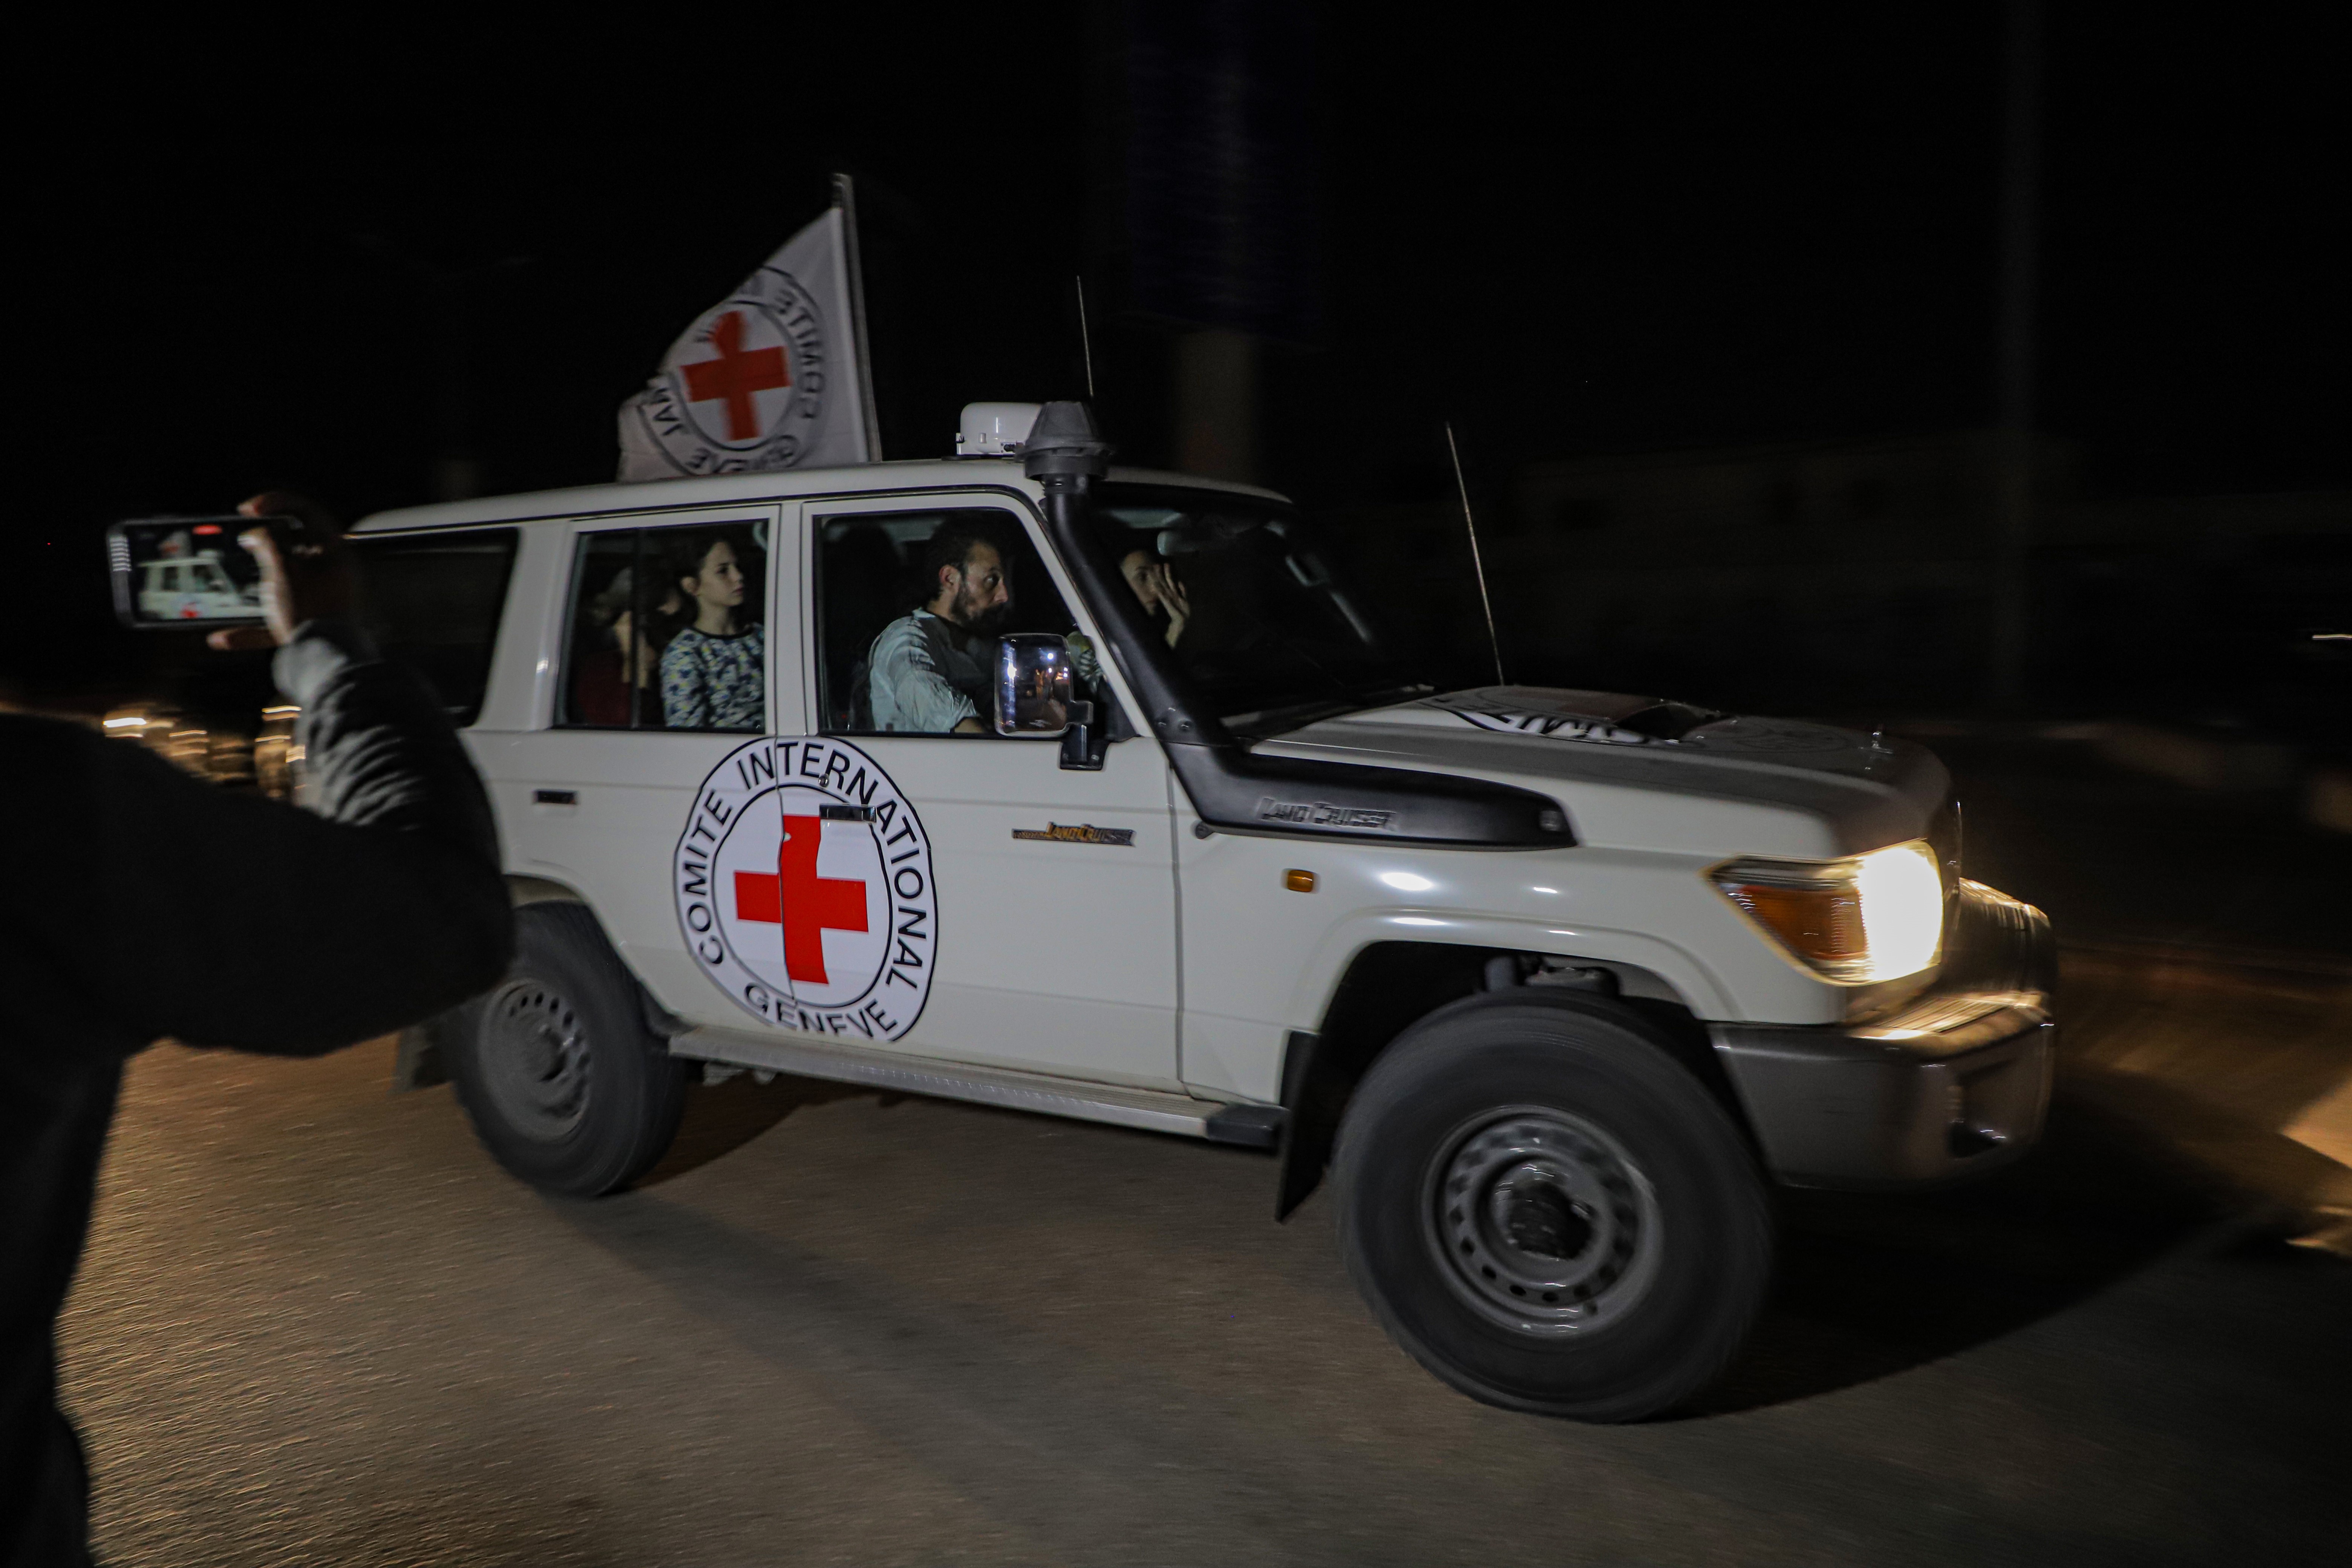 A Red Cross vehicle driving at night.